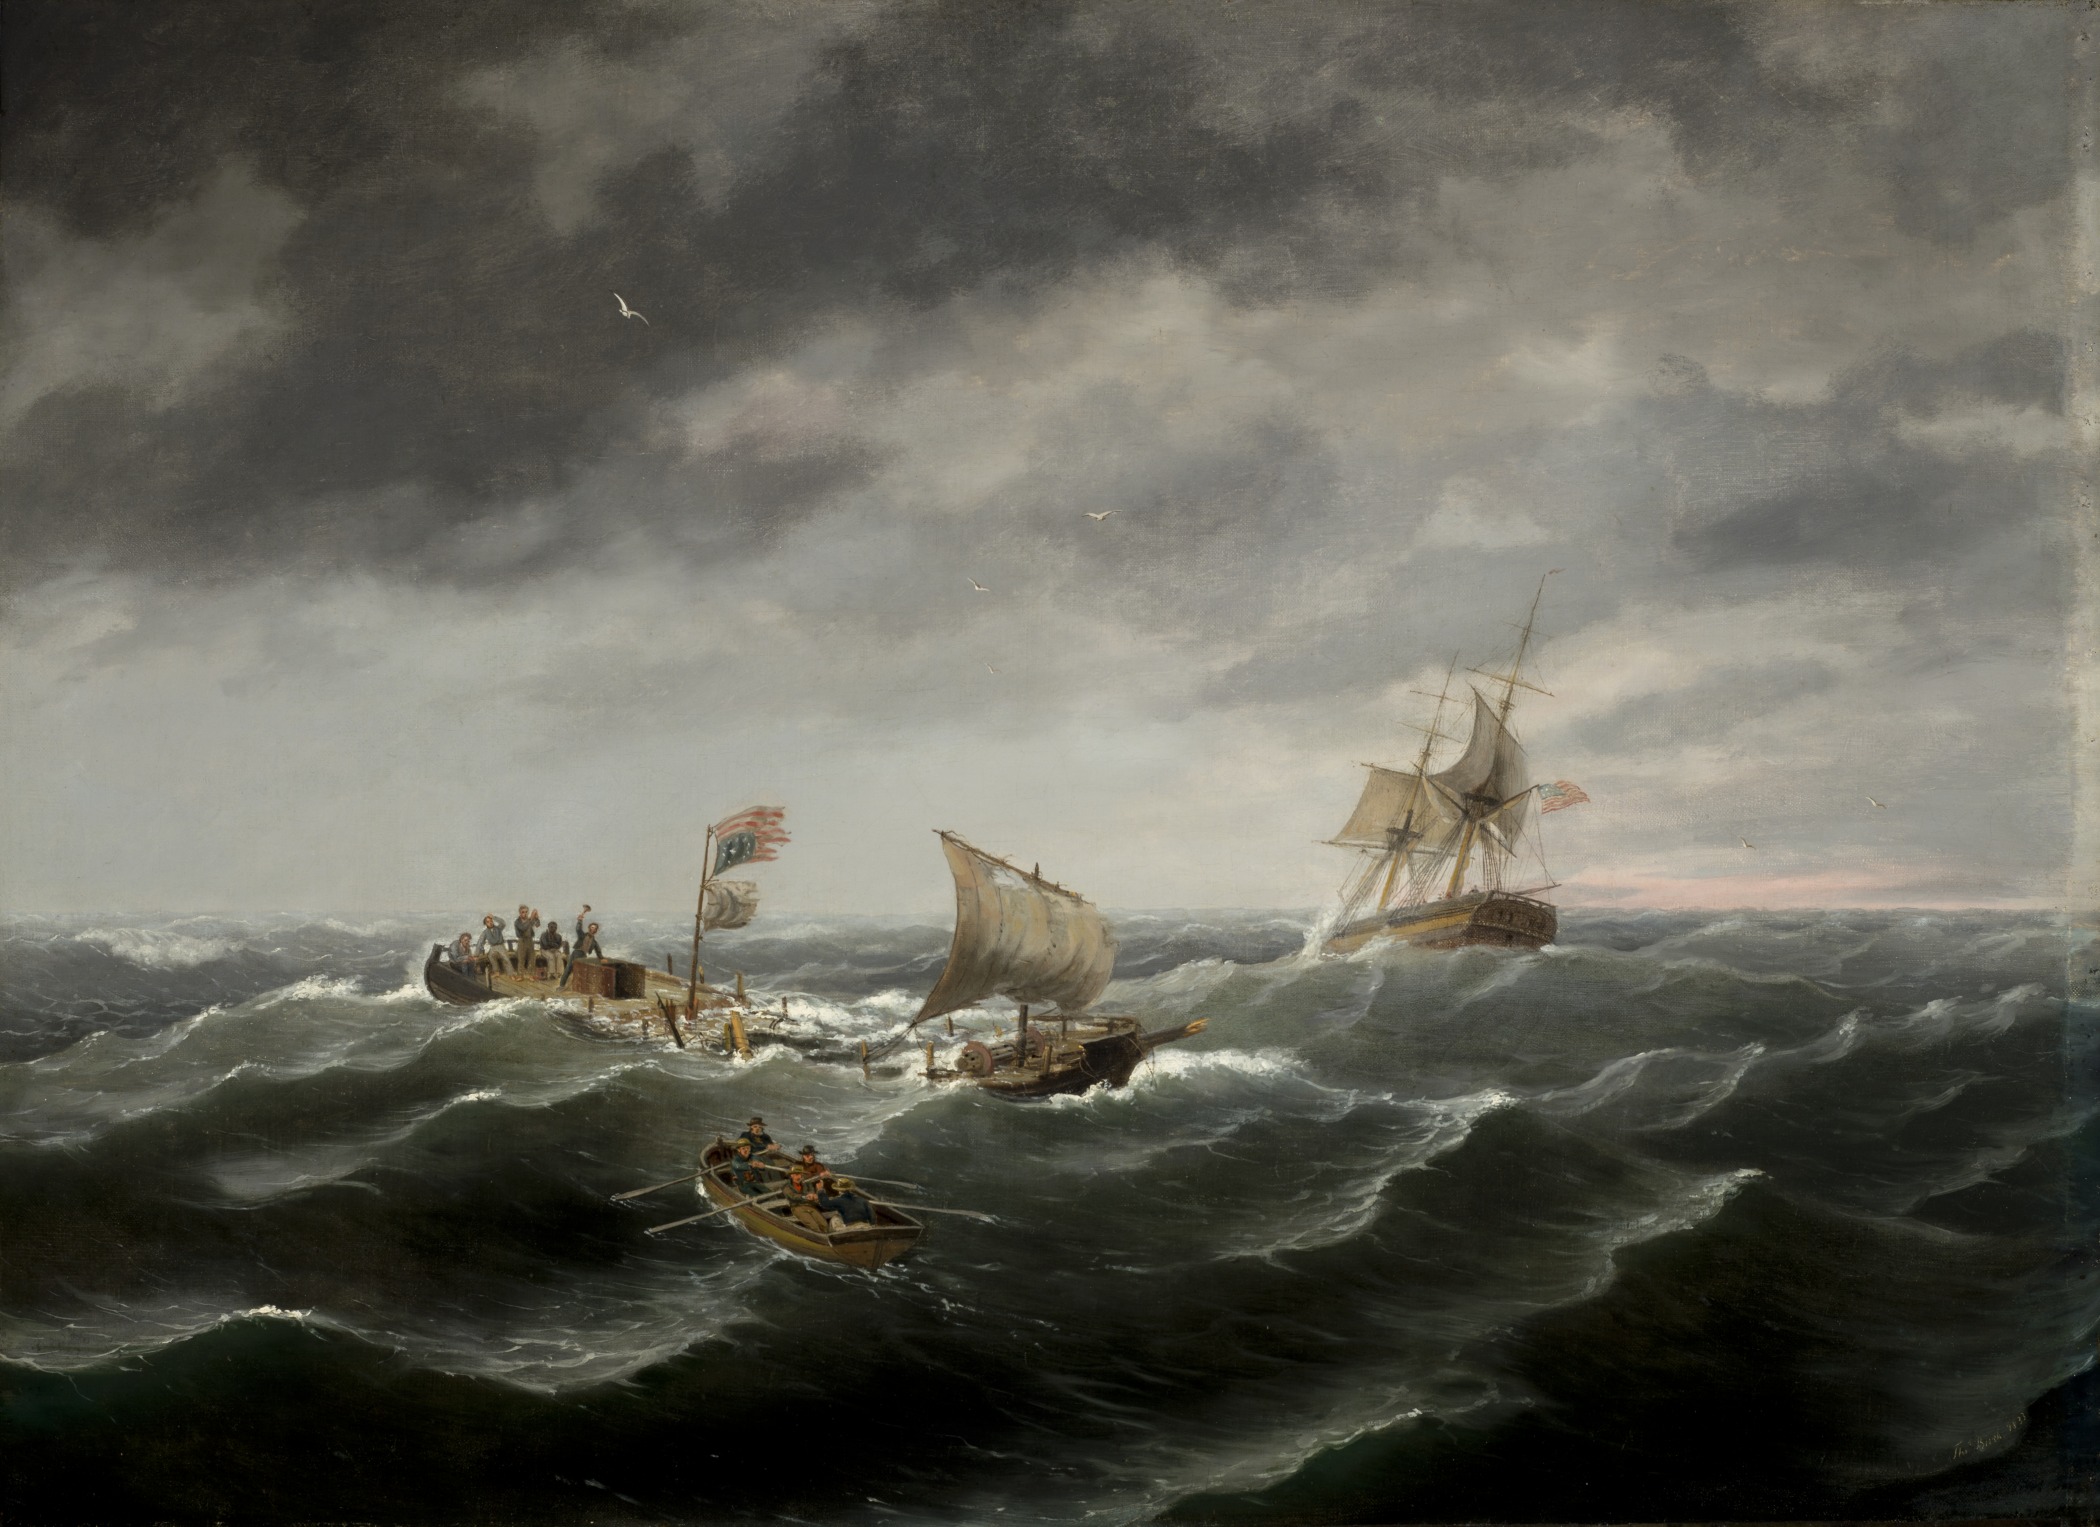 Loss of the Schooner 'John S. Spence' of Norfolk, Virginia, 2d view-Rescue of the Survivors LACMA M.86.308.2 (1 of 2)